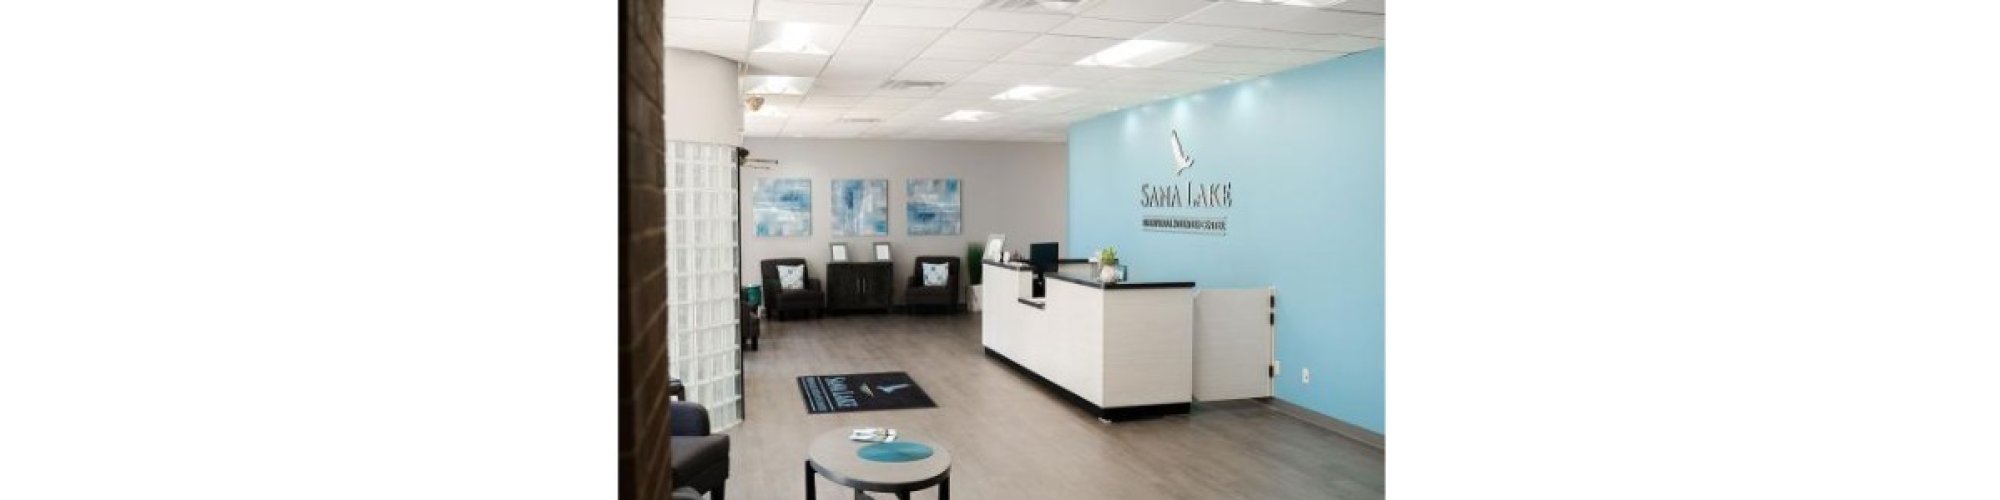 Sana Lake Recovery - St. Louis Outpatient Rehab, IOP, and Suboxone Providers